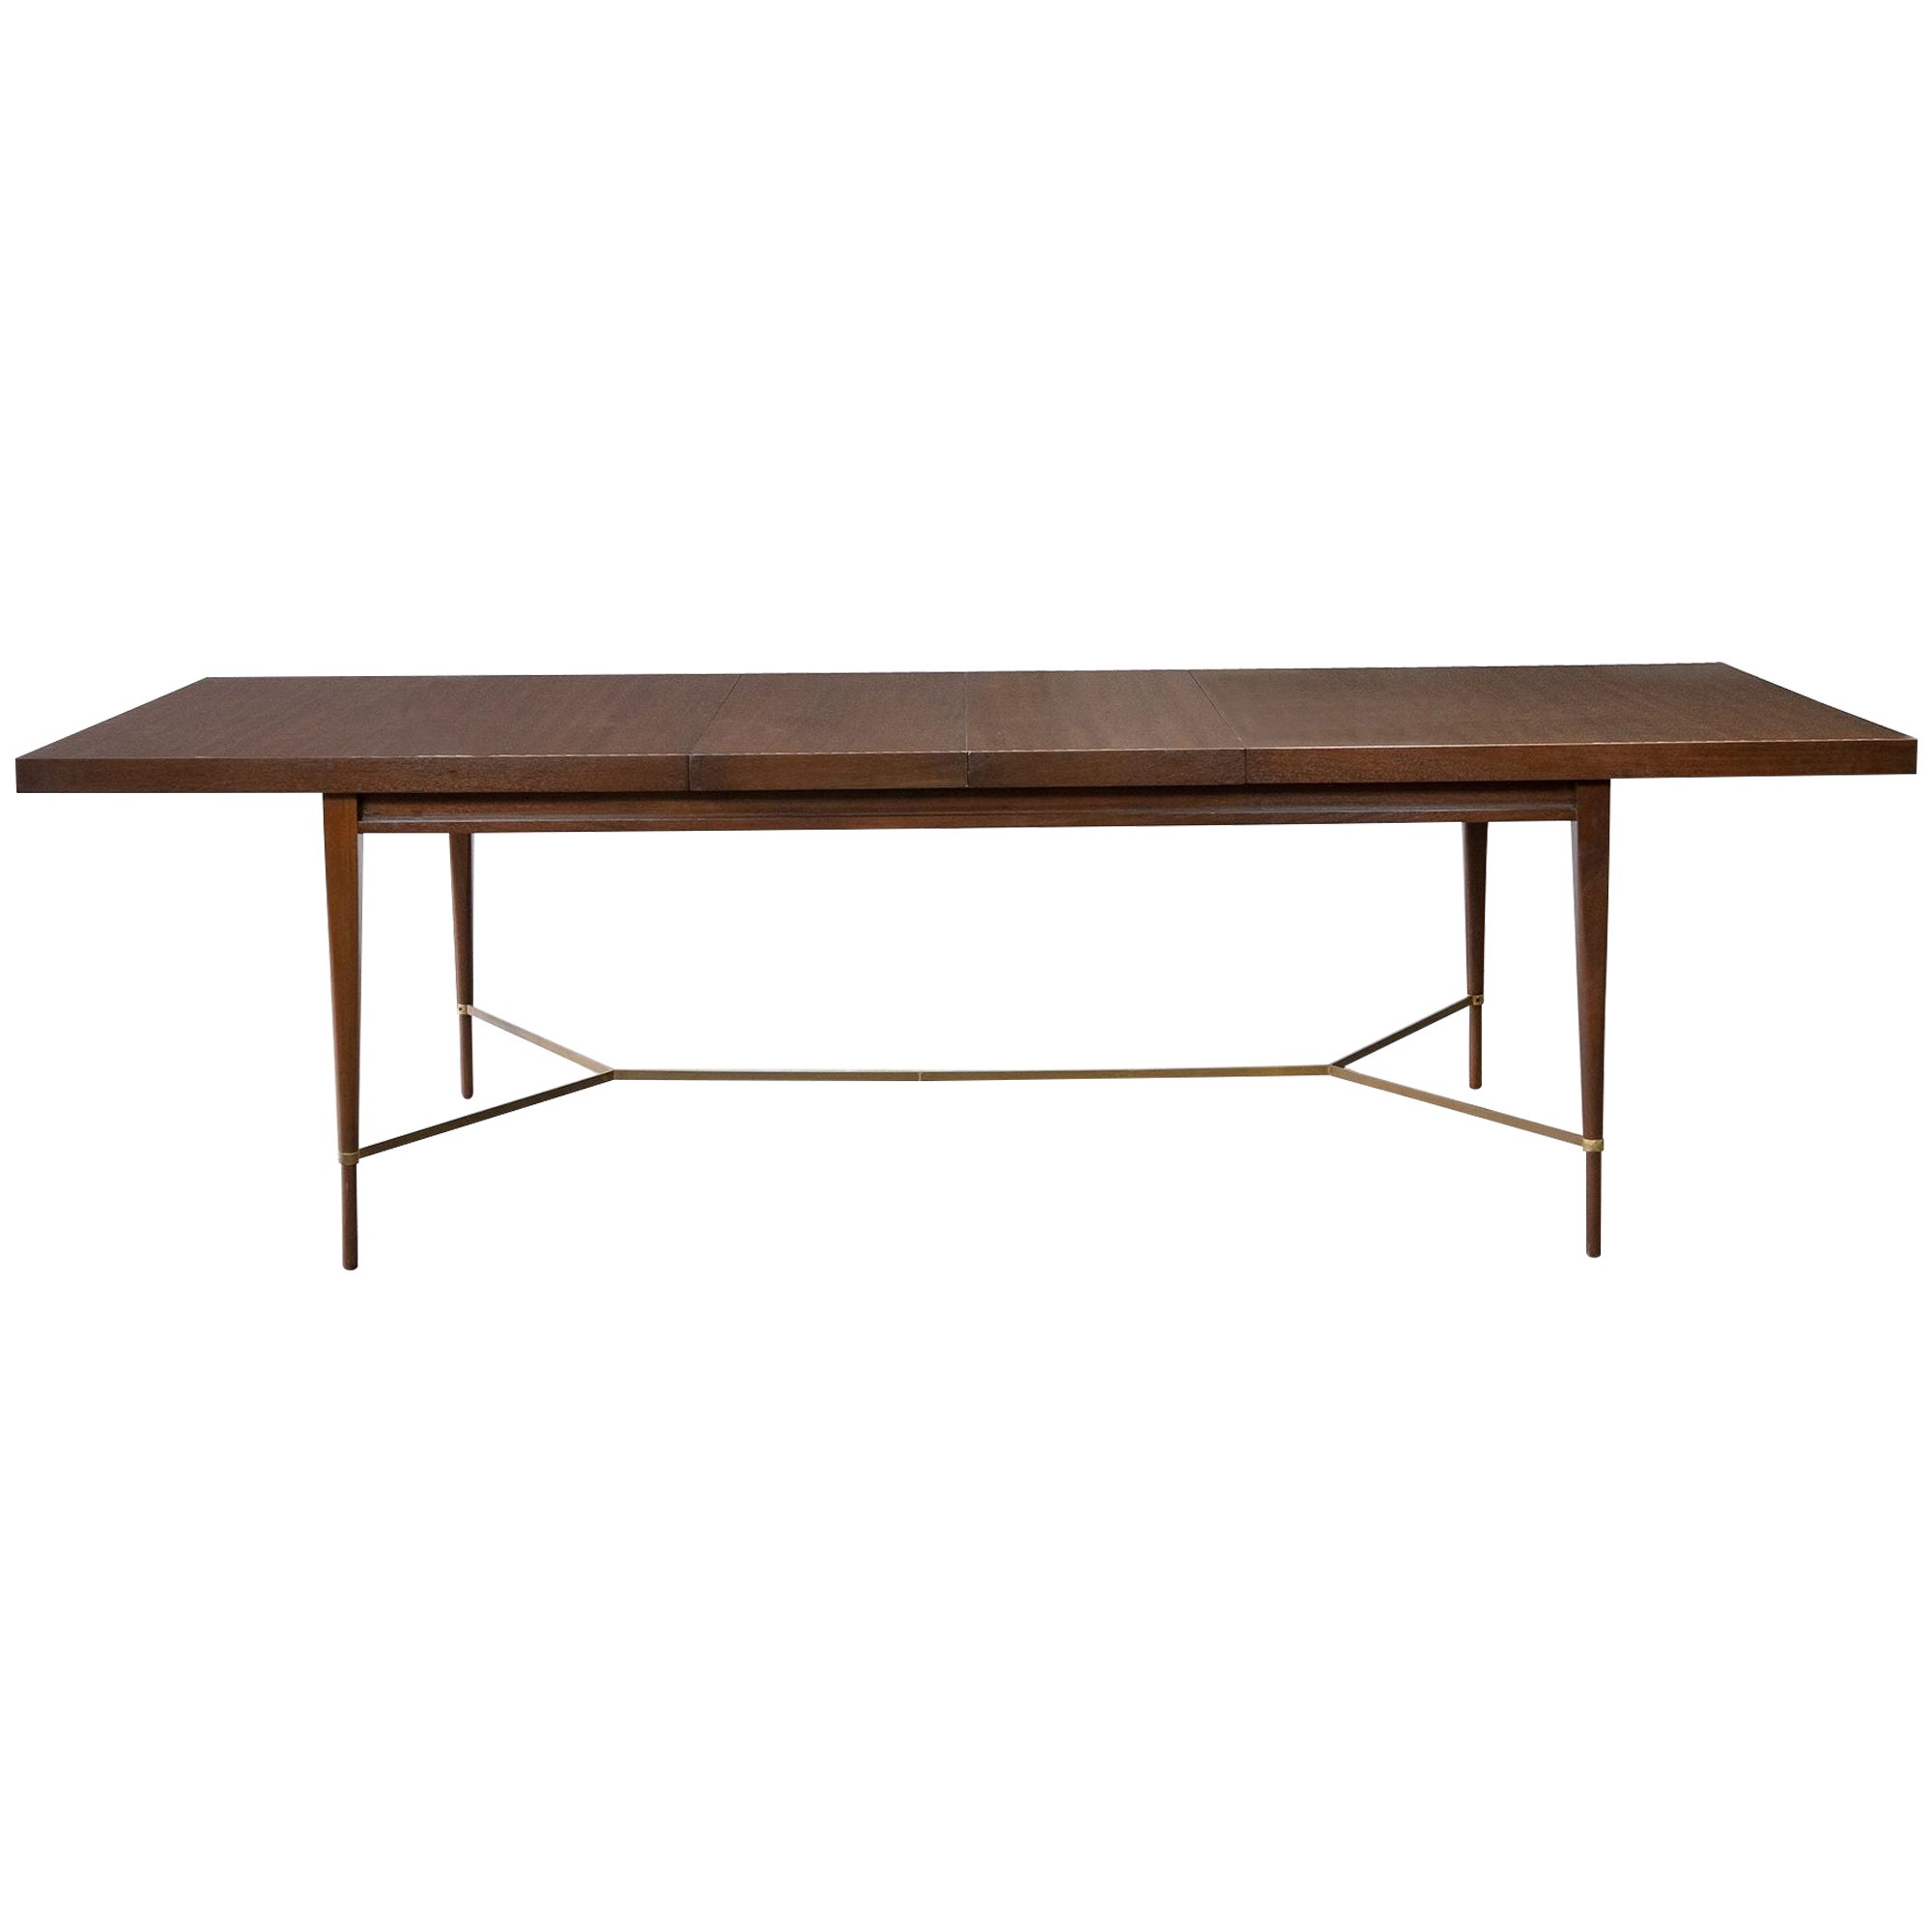 Paul McCobb Irwin Collection Mahogany Dining Table for Calvin, 1950s